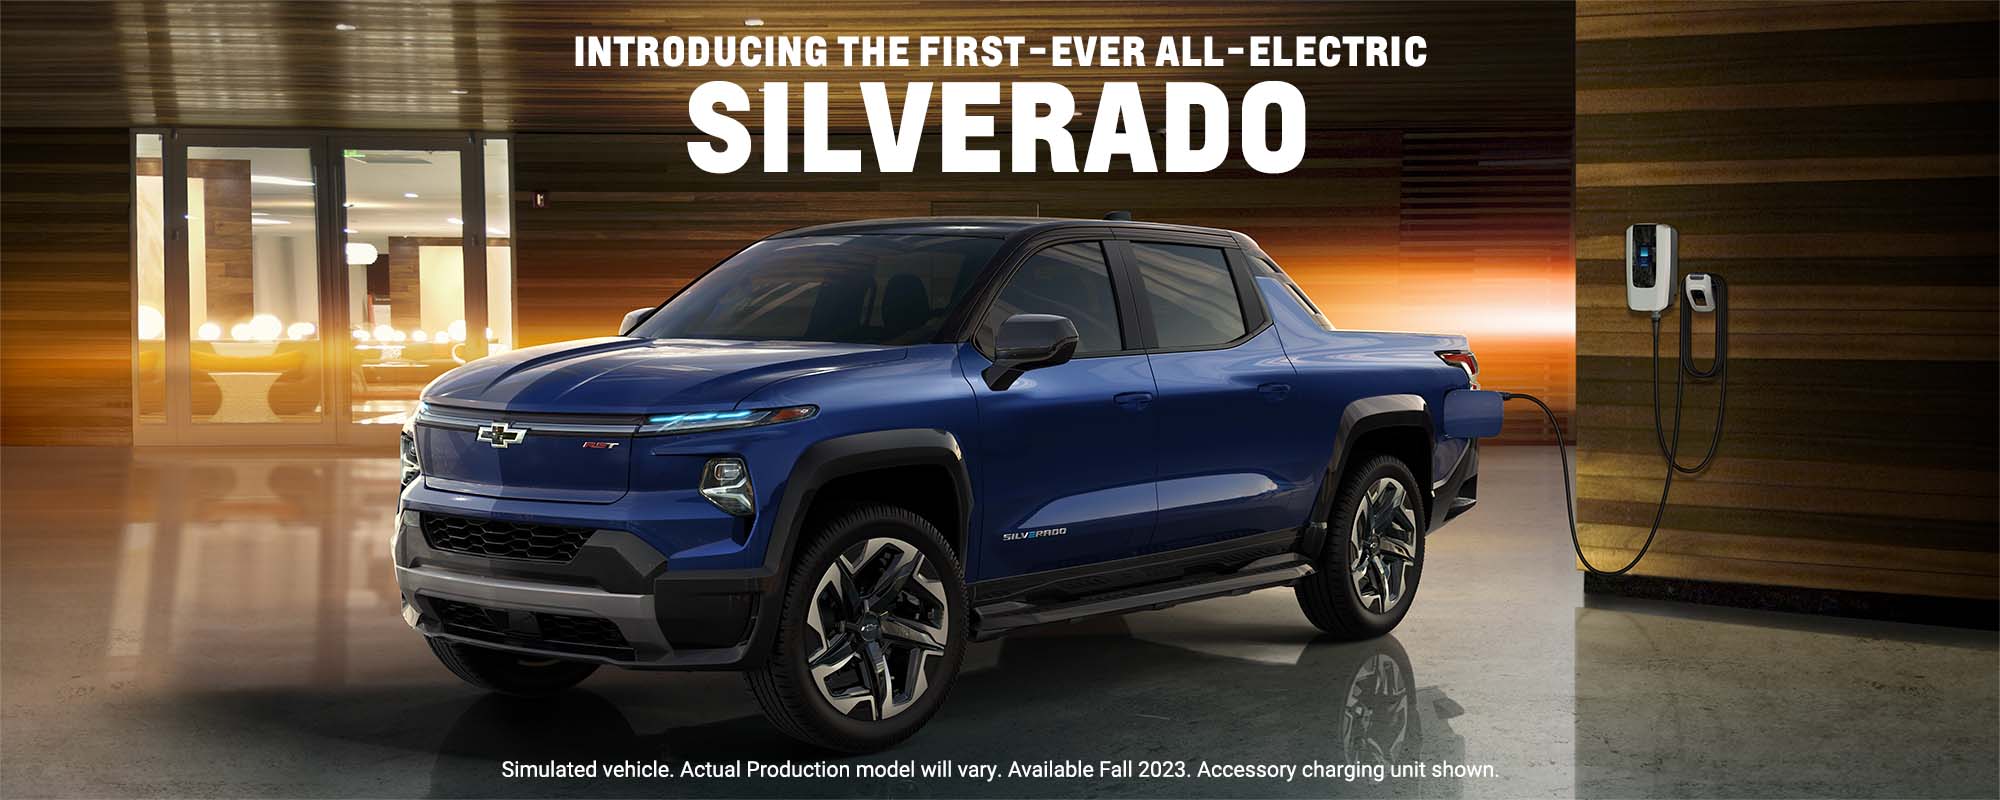 Introducing the first-ever all-electric Silverado